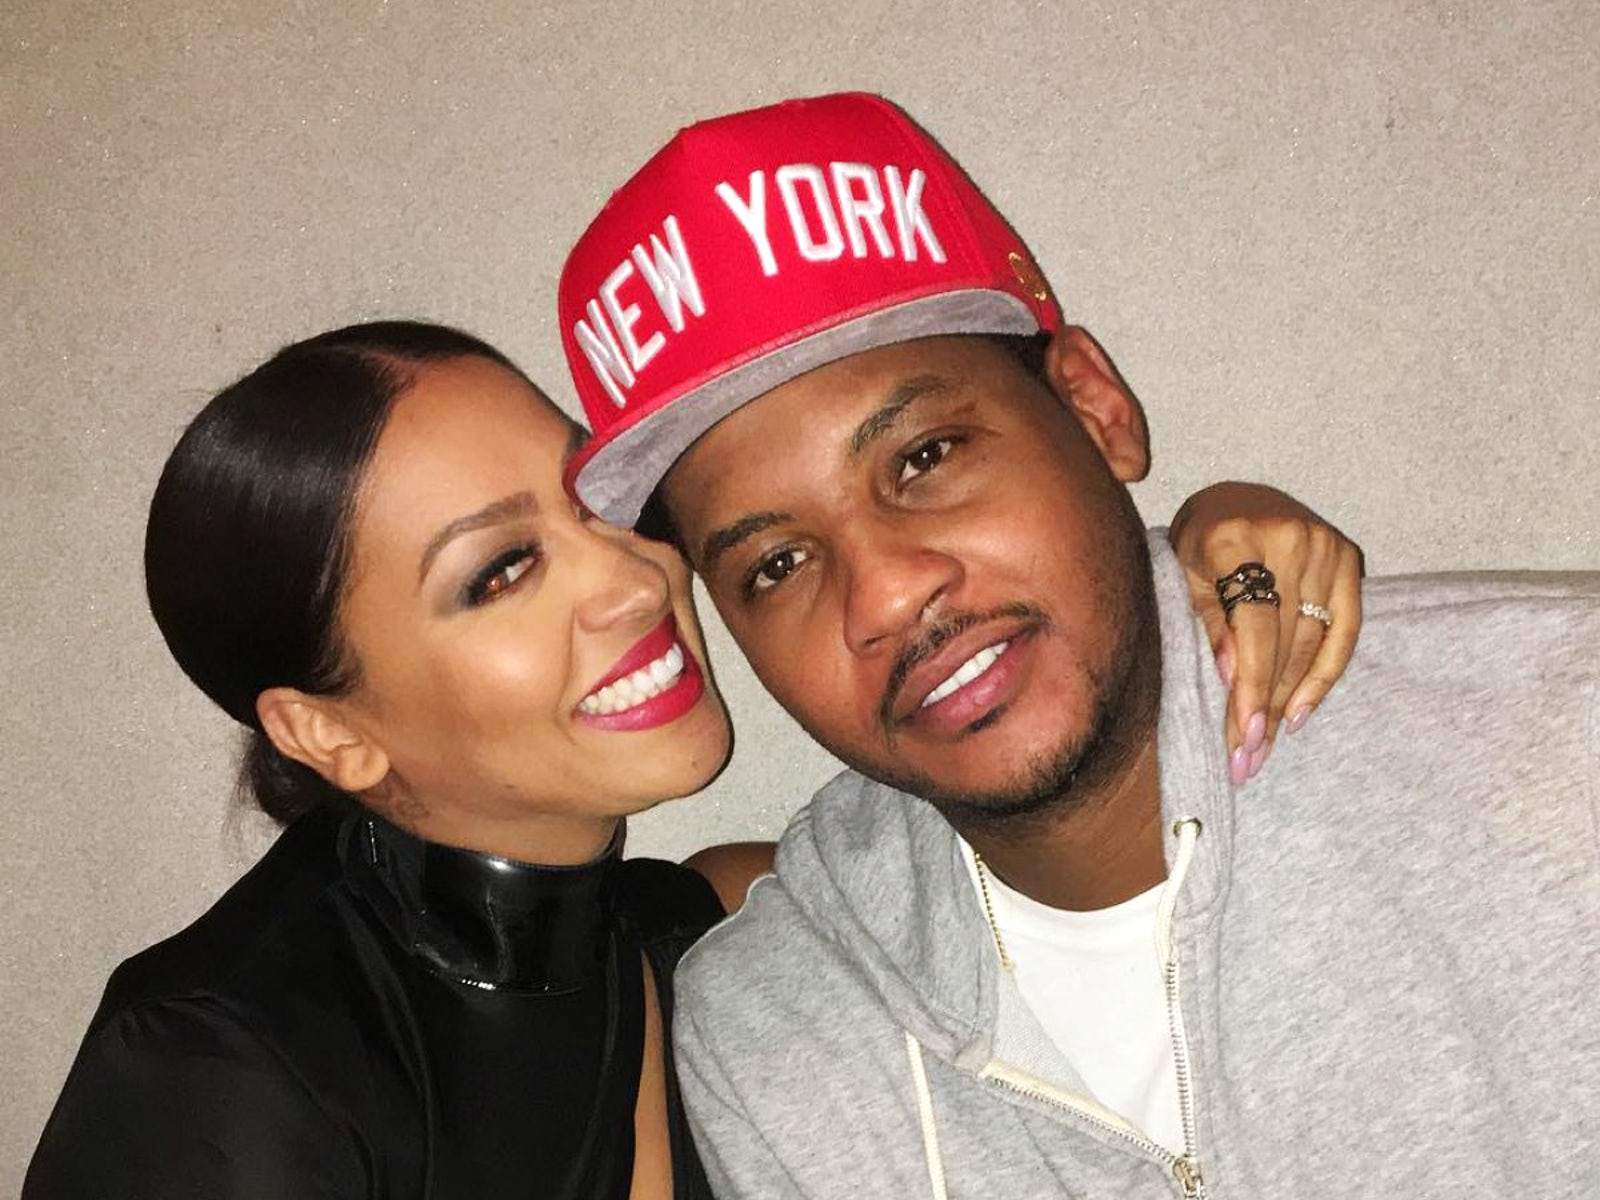 who is carmelo anthony dating right now